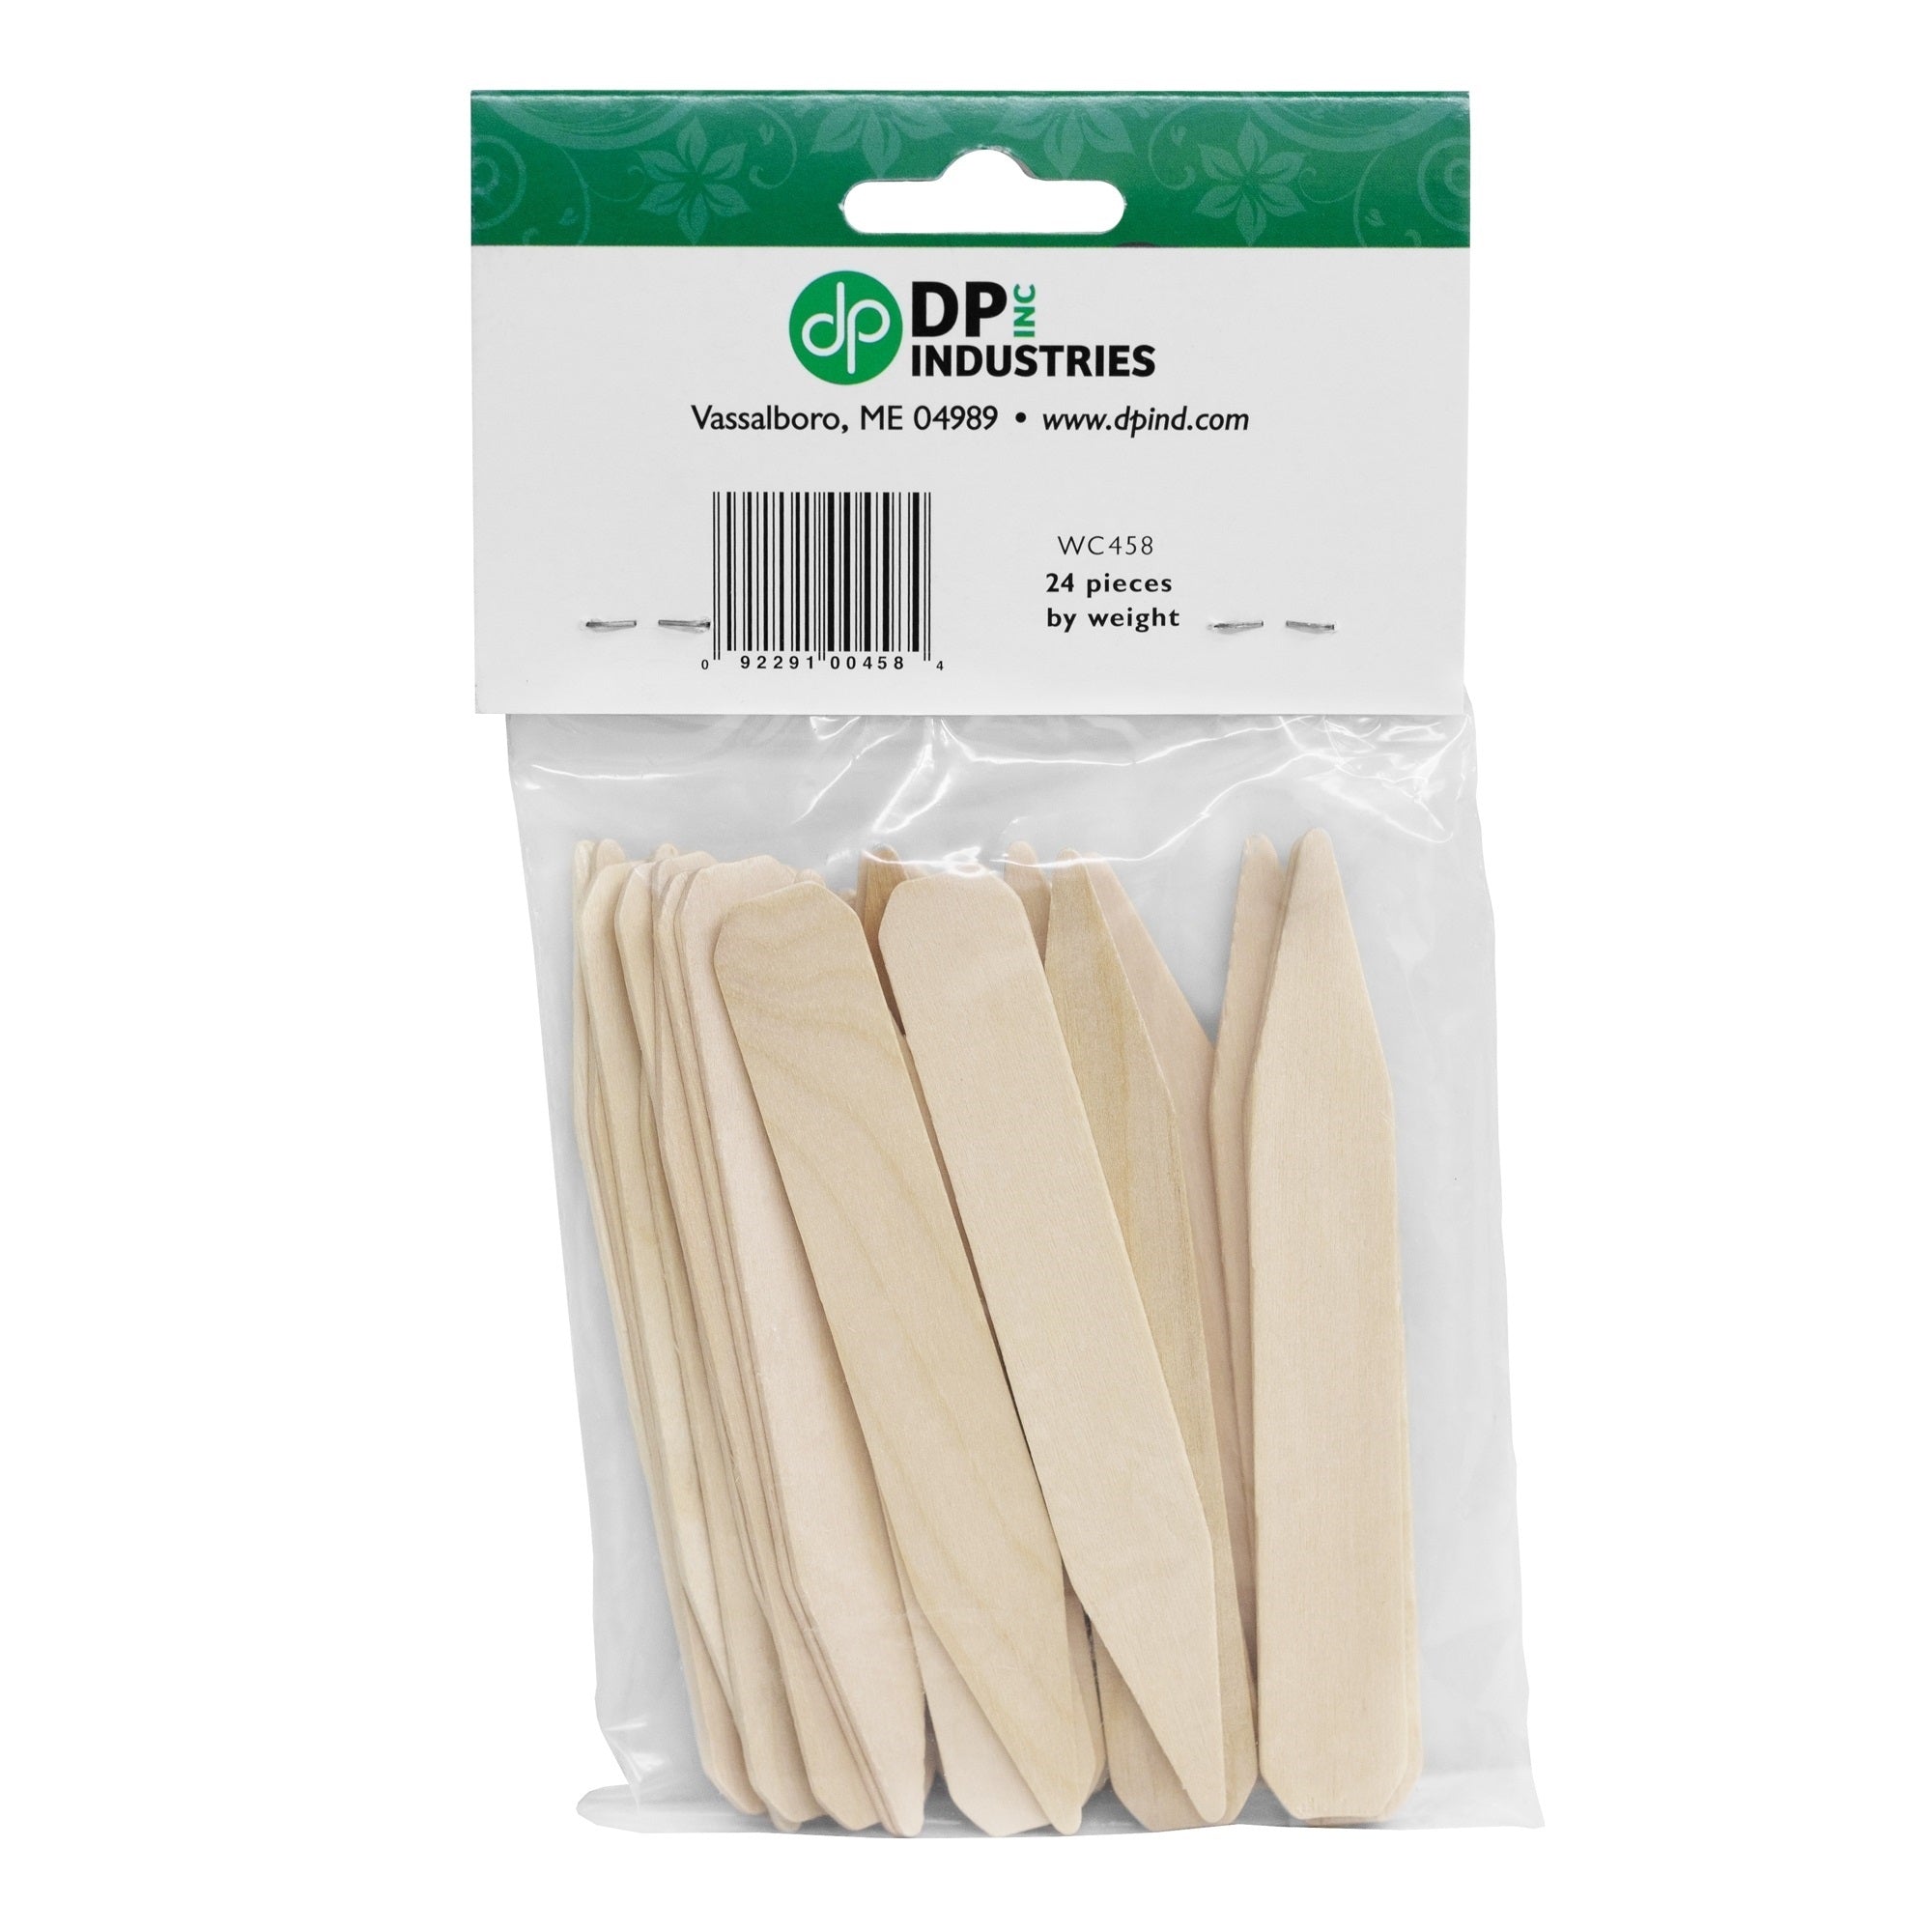 DP Industries Coated White Wood Bedding Labels, 4" (20 Per Pack)